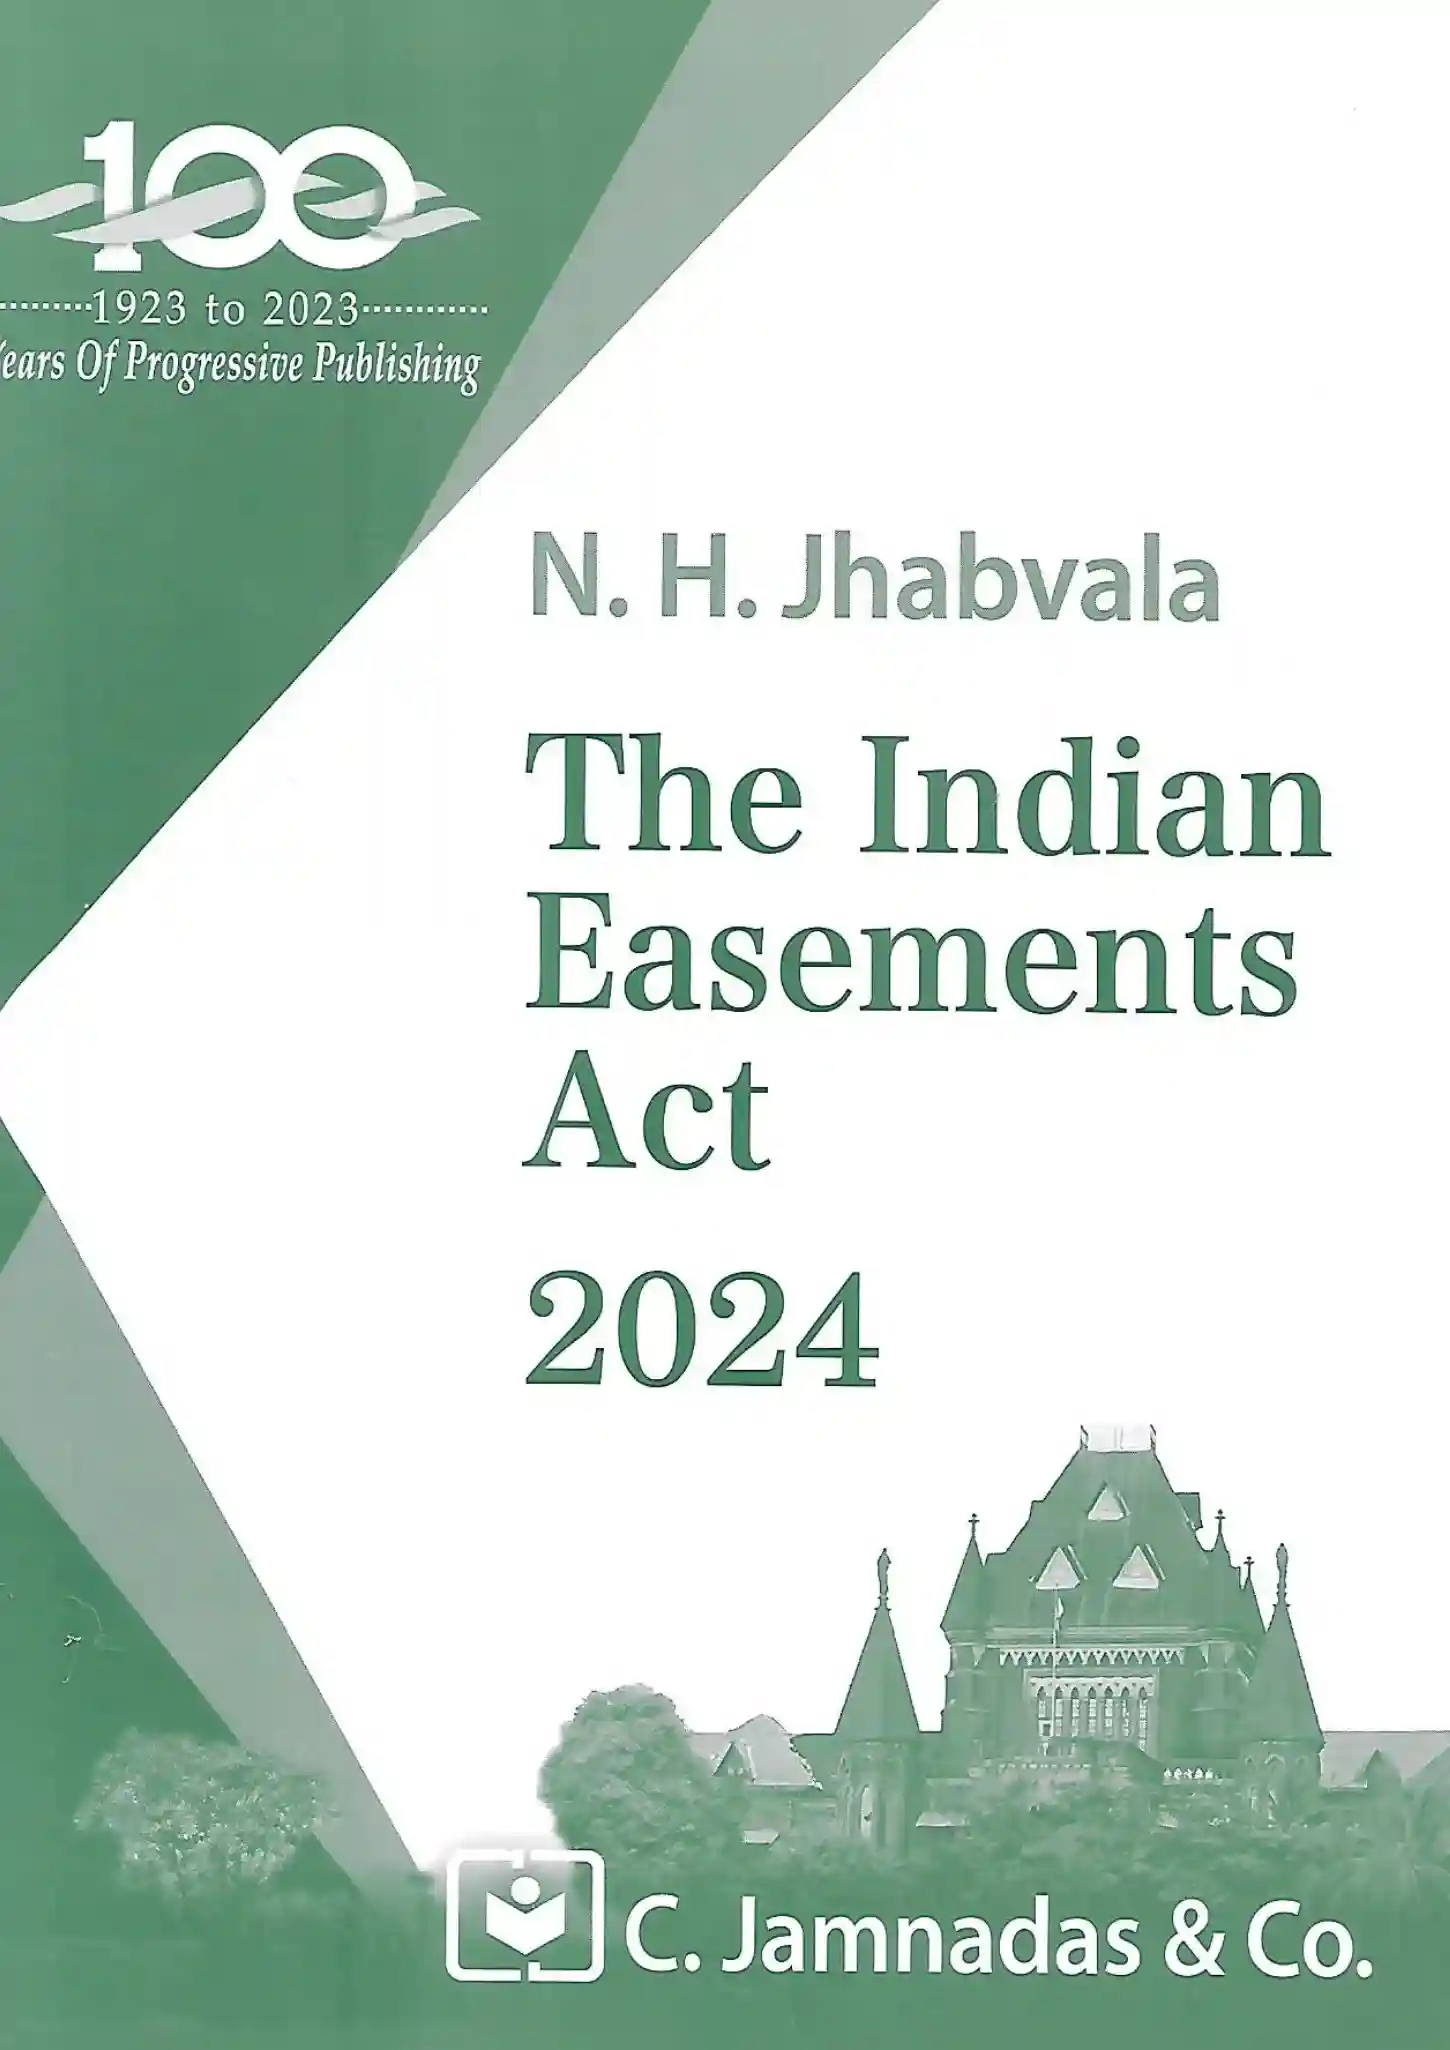 The Indian Easements Act